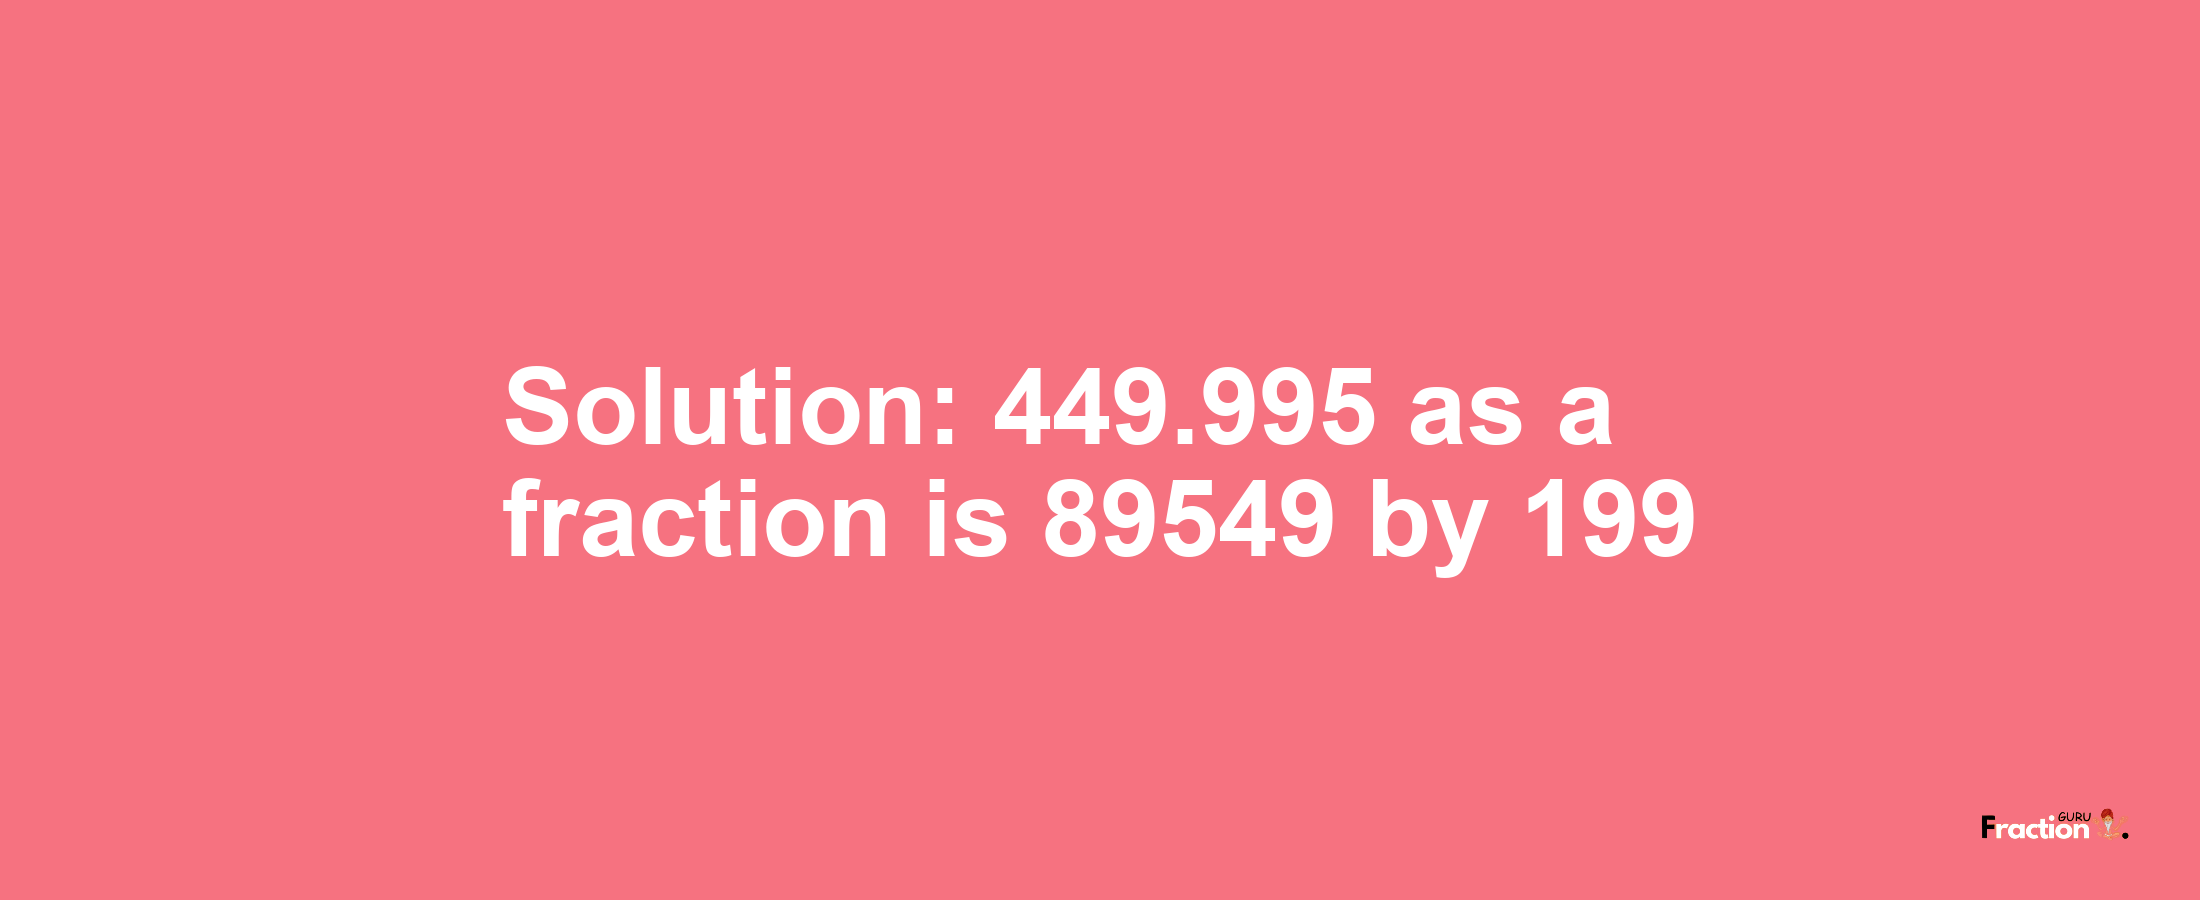 Solution:449.995 as a fraction is 89549/199